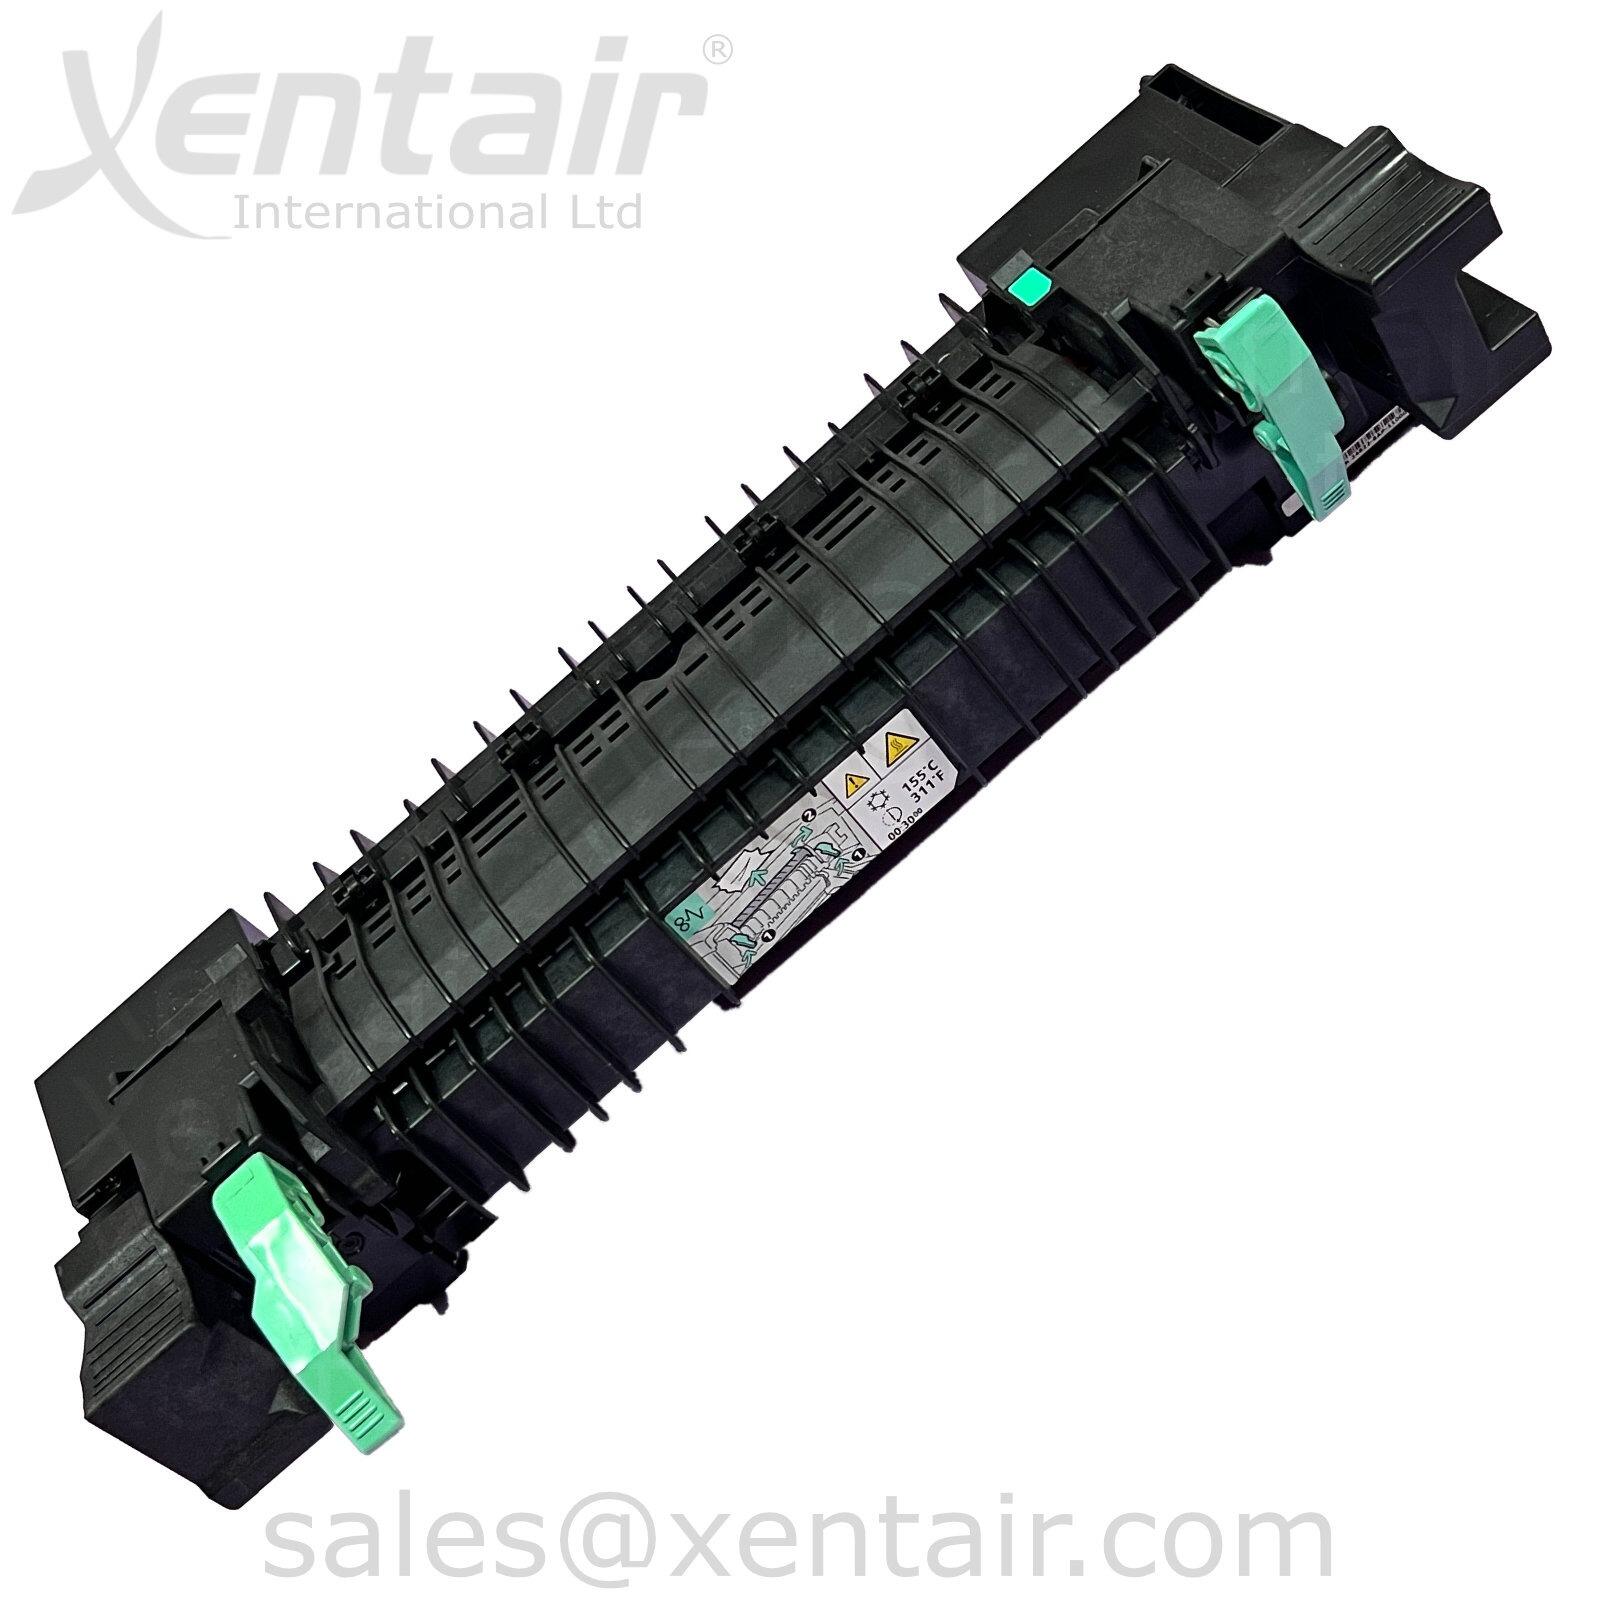 Xerox® Phaser™ 6600 WorkCentre™ 6605 220 Volt Fuser Assembly 115R00077 115R77